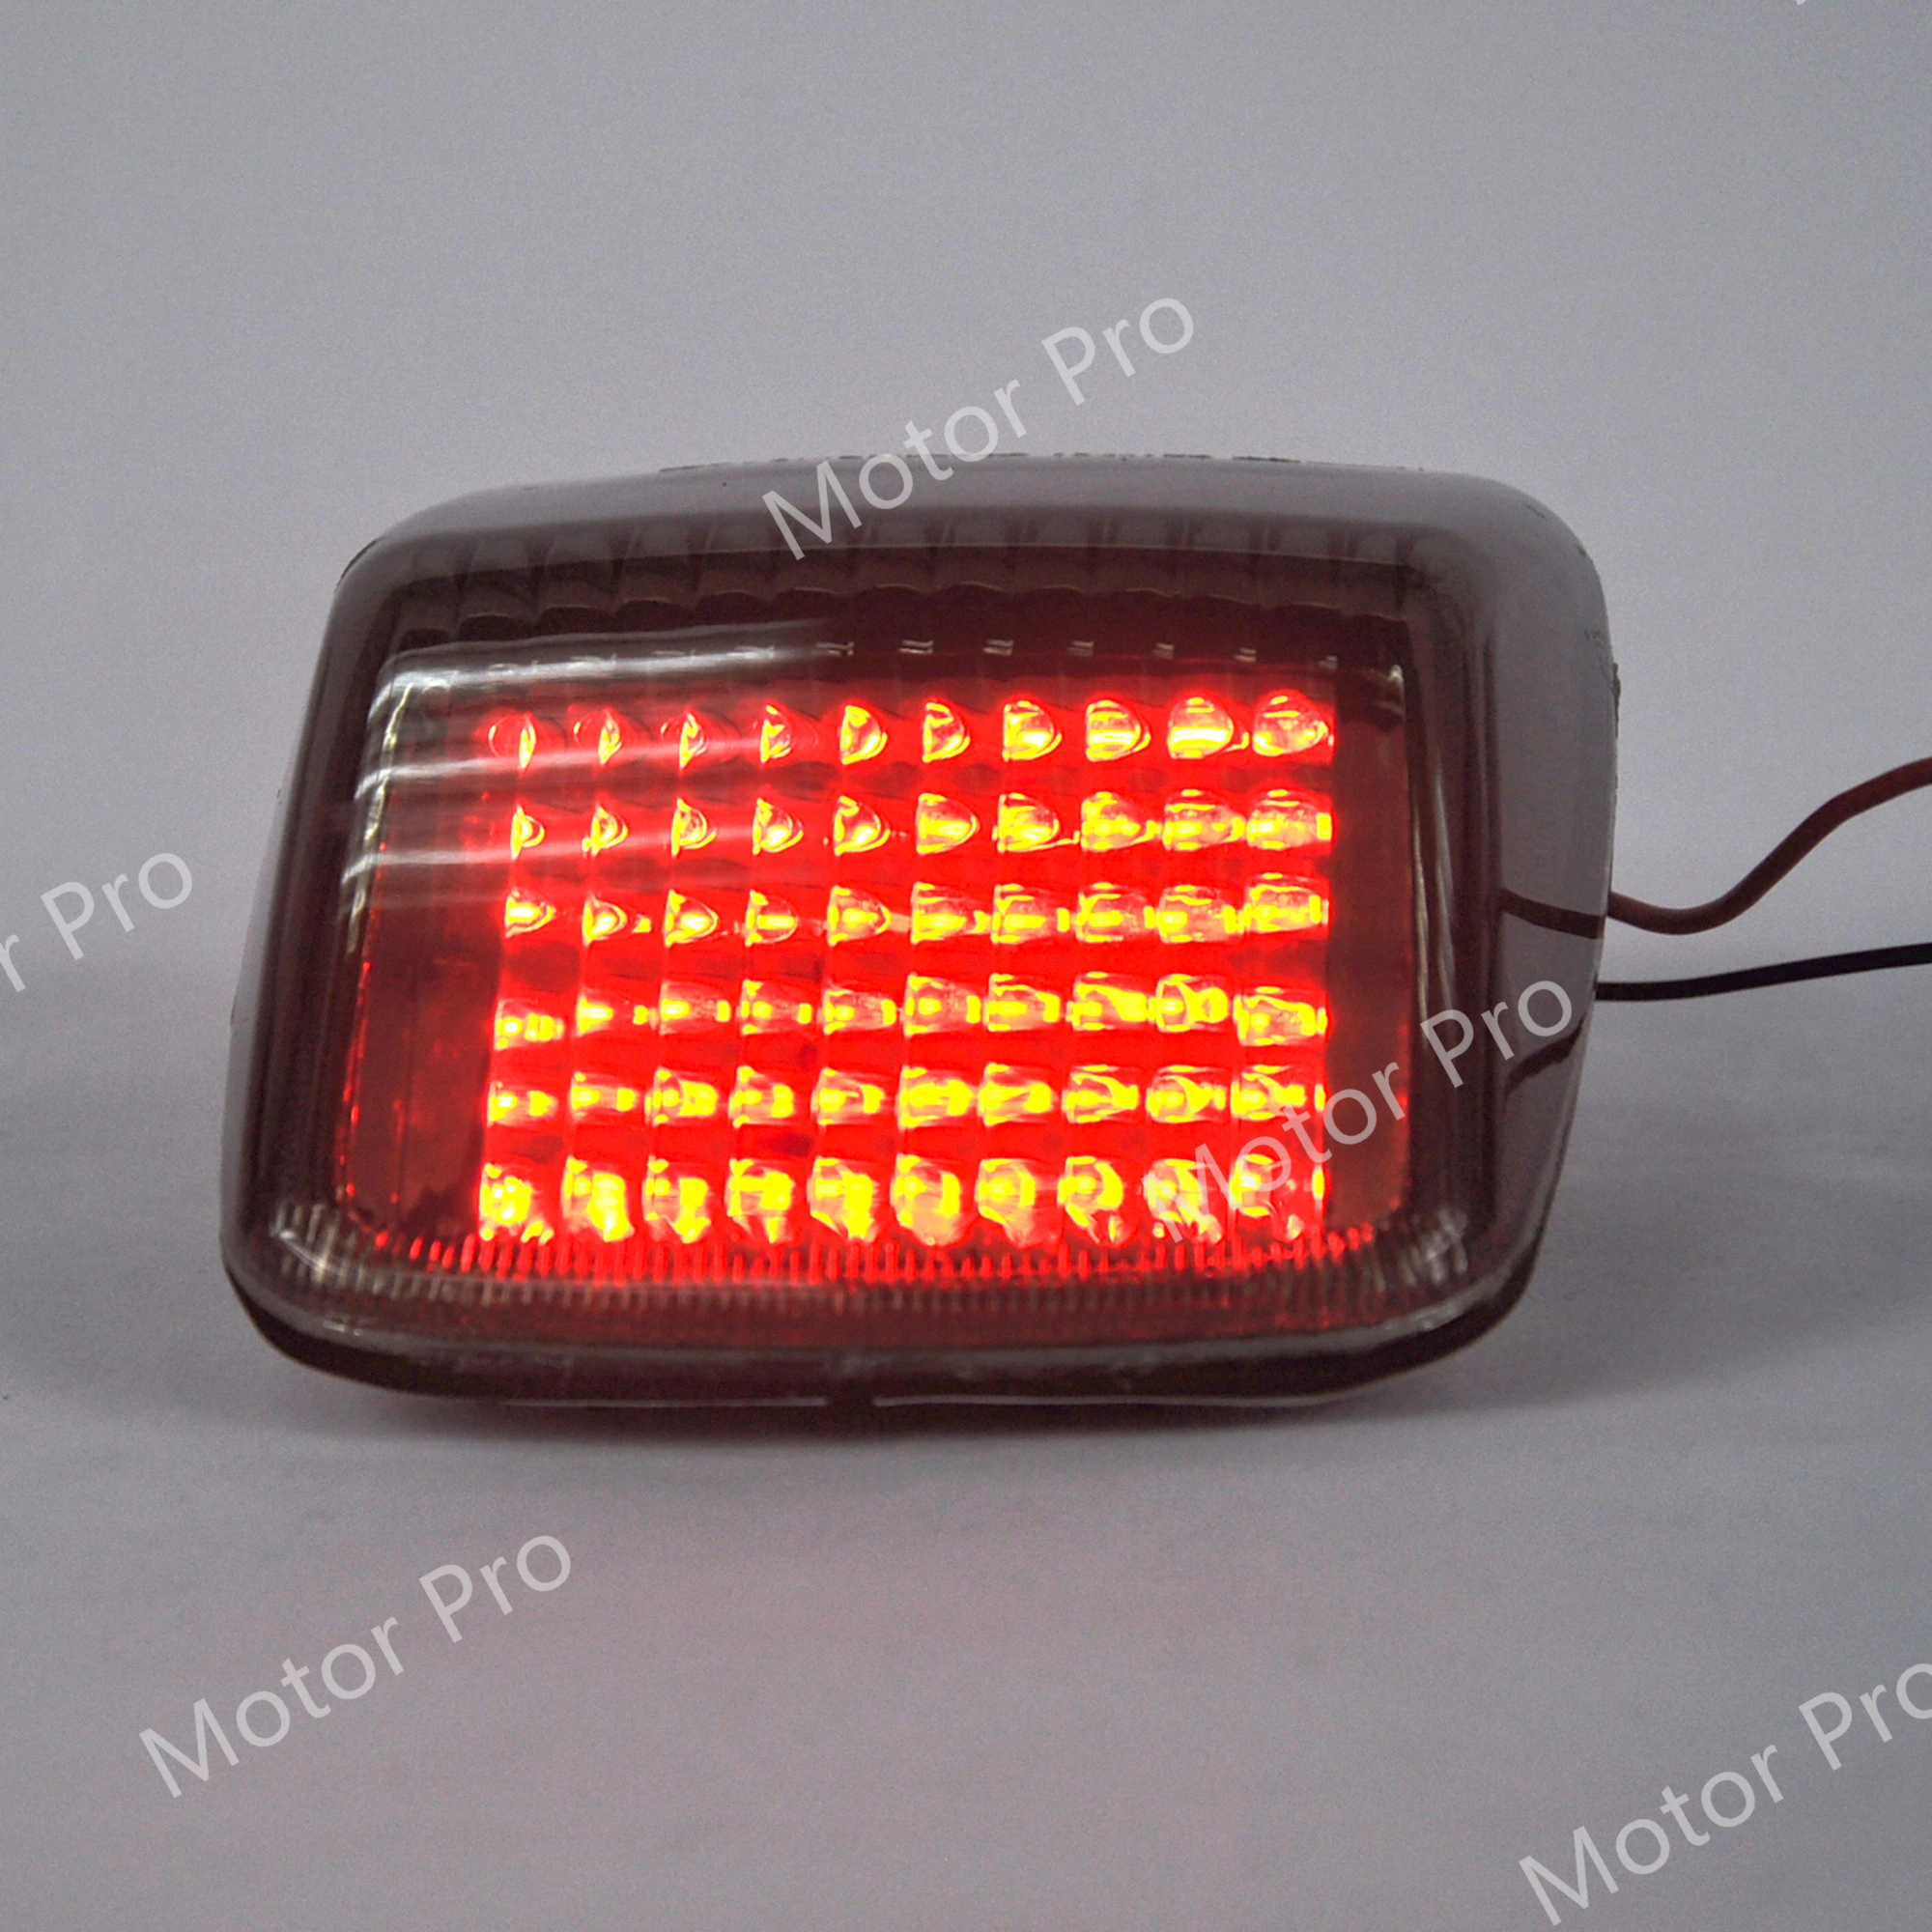 Motorcycle Taillight For Harley Davidson Deuce LED Turn Signals Lamp Brake Tail Light Replacement Accessories enlarge